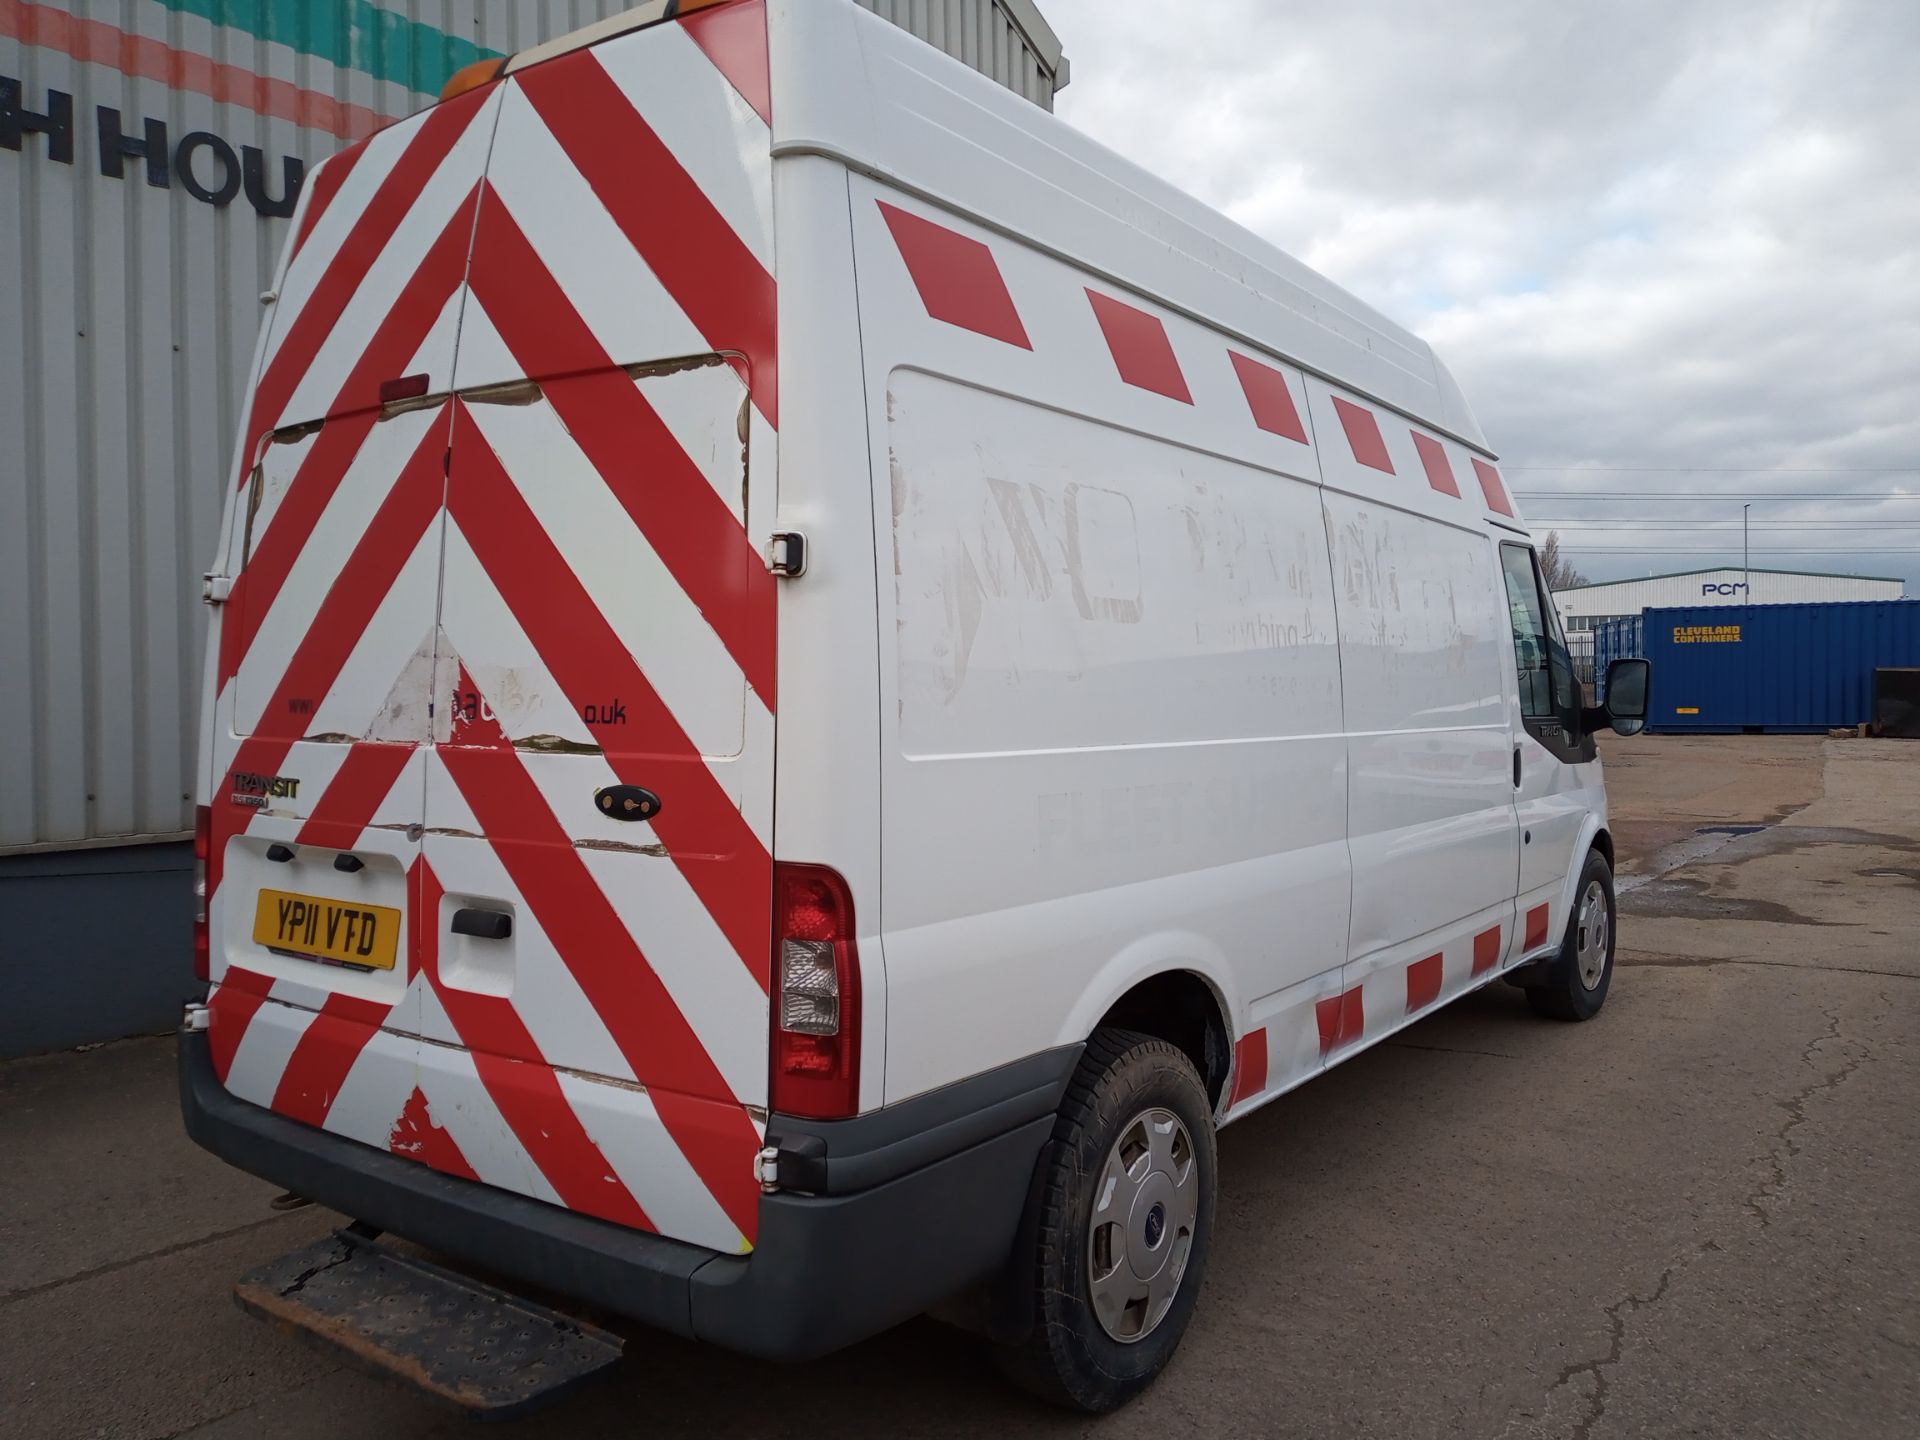 2011 Ford Transit 115 T350i RWD LWB Medium Roof - CL505 - Location: Corby, Northamptonshire140,182 - Image 8 of 16